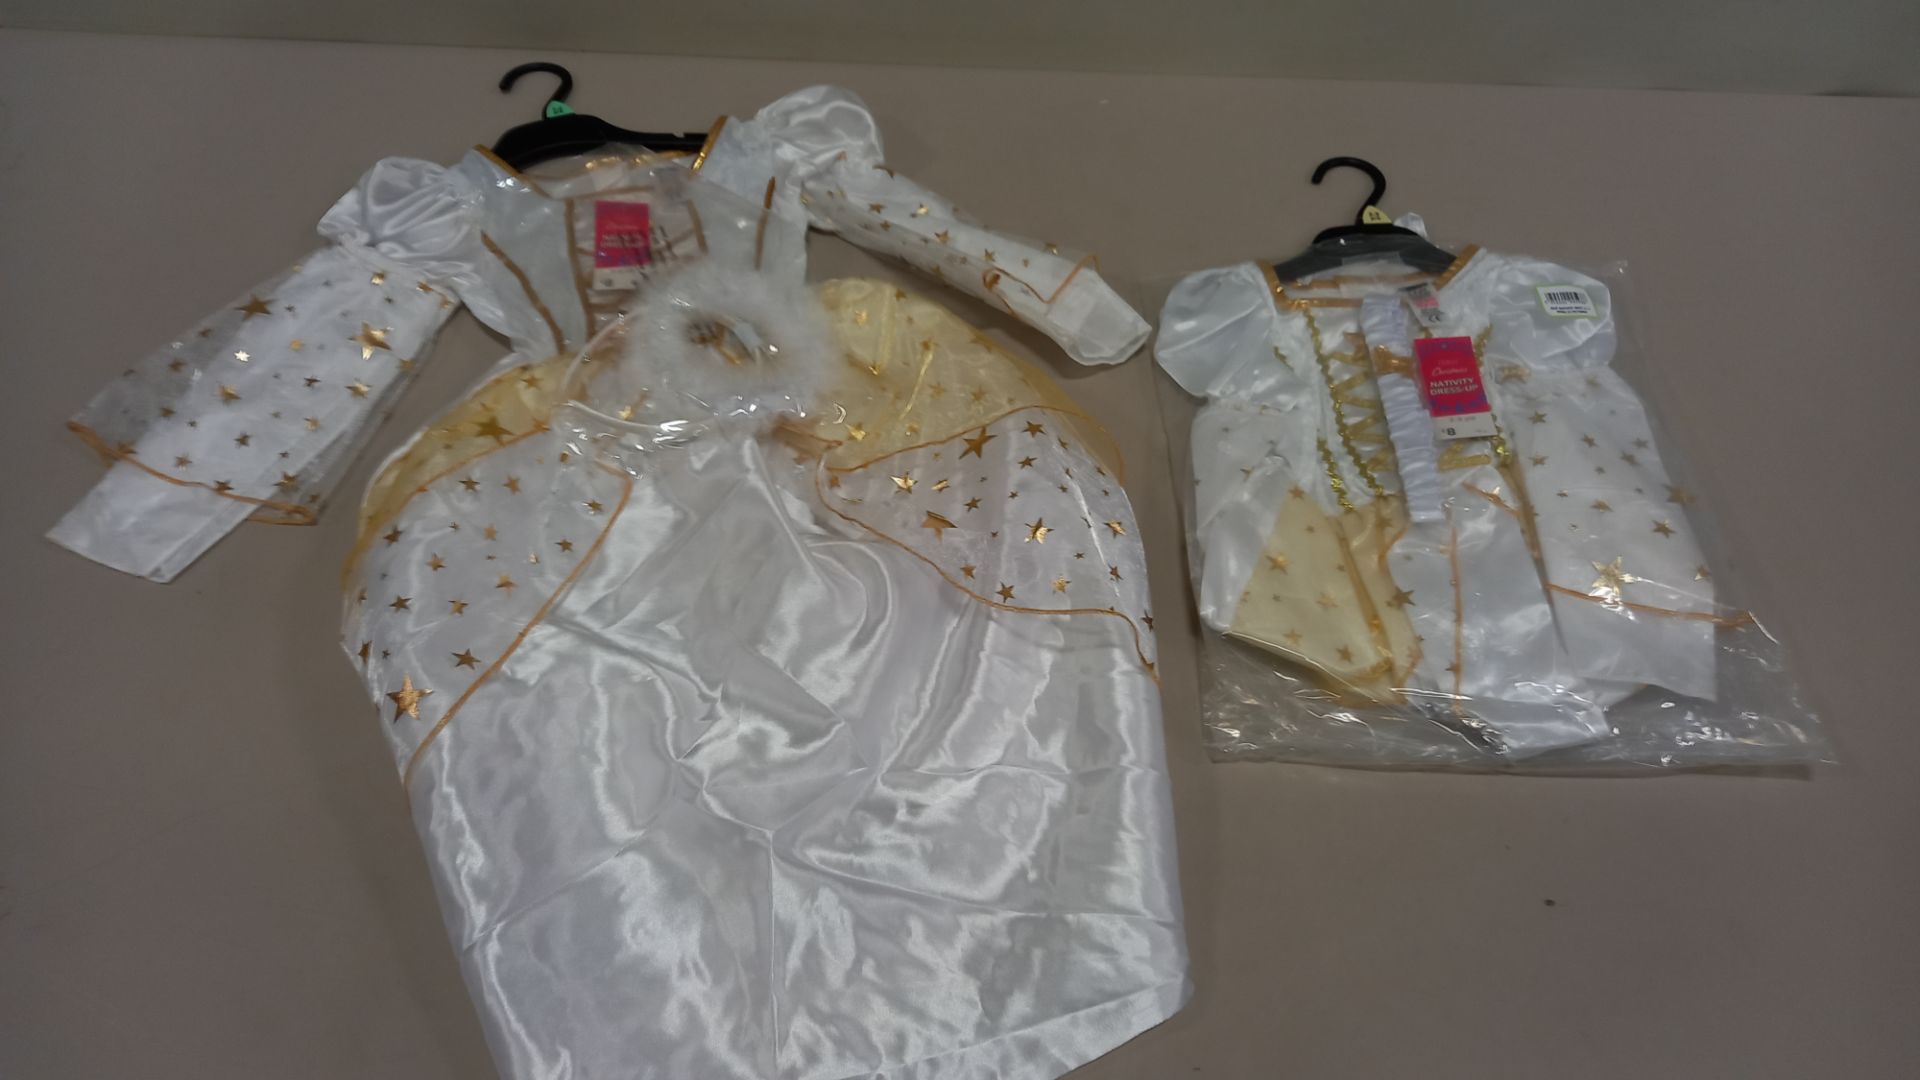 39 X BRAND NEW TESCO NATIVITY DRESS UP SIZE 3-4 YEARS AND 18-24 MONTHS RRP £8.00 (TOTAL RRP £312.